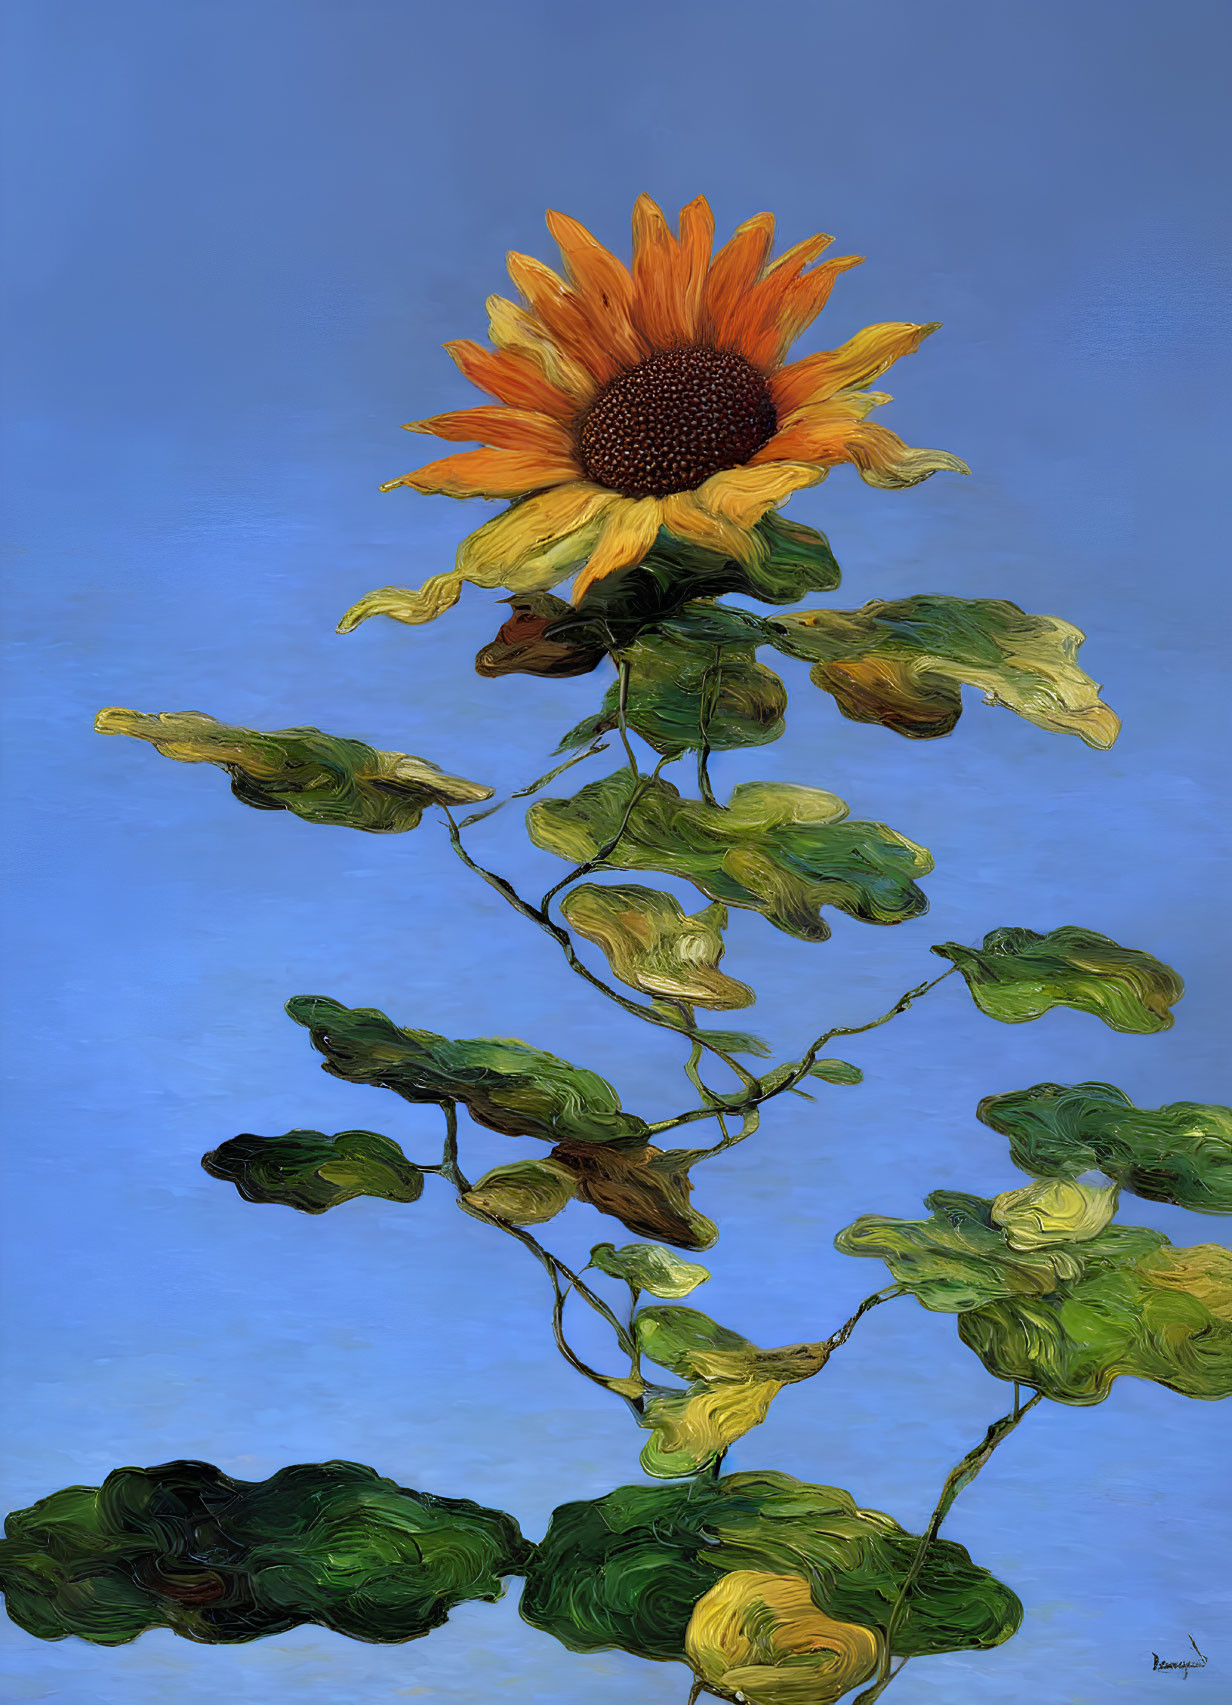 Colorful sunflower painting on blue background with detailed leaves and prominent bloom.